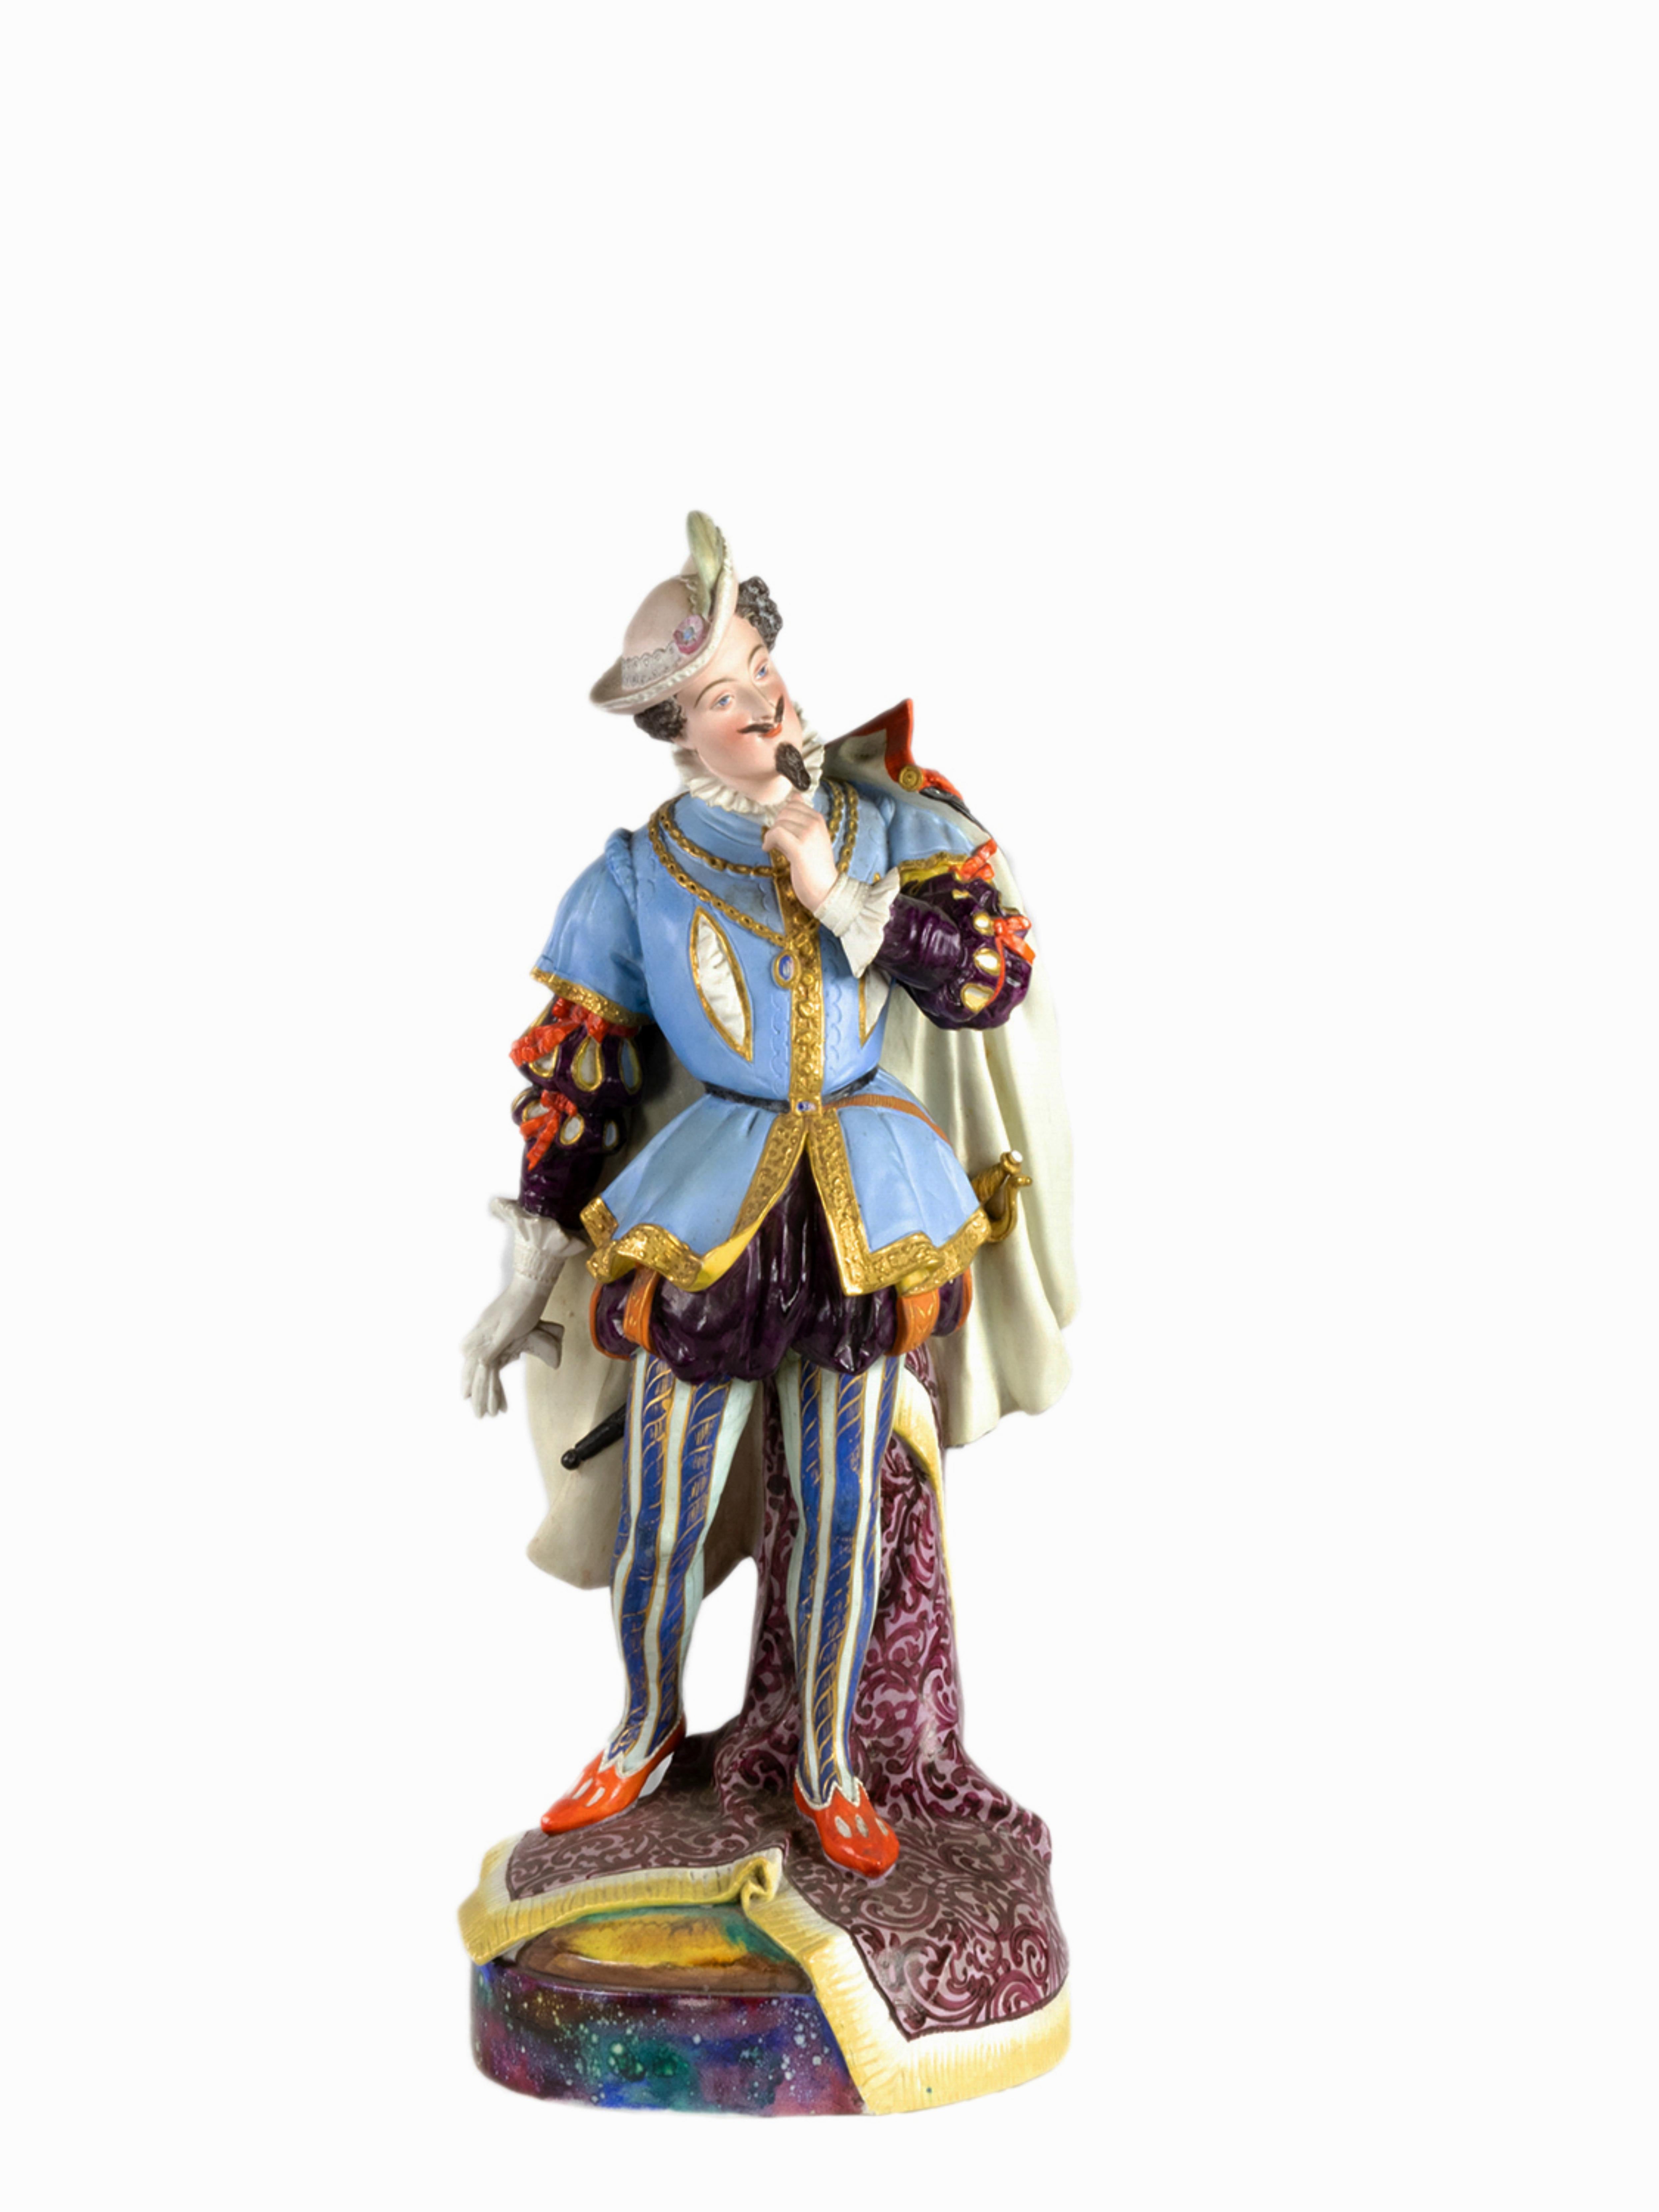 A pair of polychrome earthenware statues of a Baroque styled couple (man and woman) not common in Creil Montereau and signed 'CREIL LM C'. 
Dimensions: 53.5 cm height 25 cm diameter